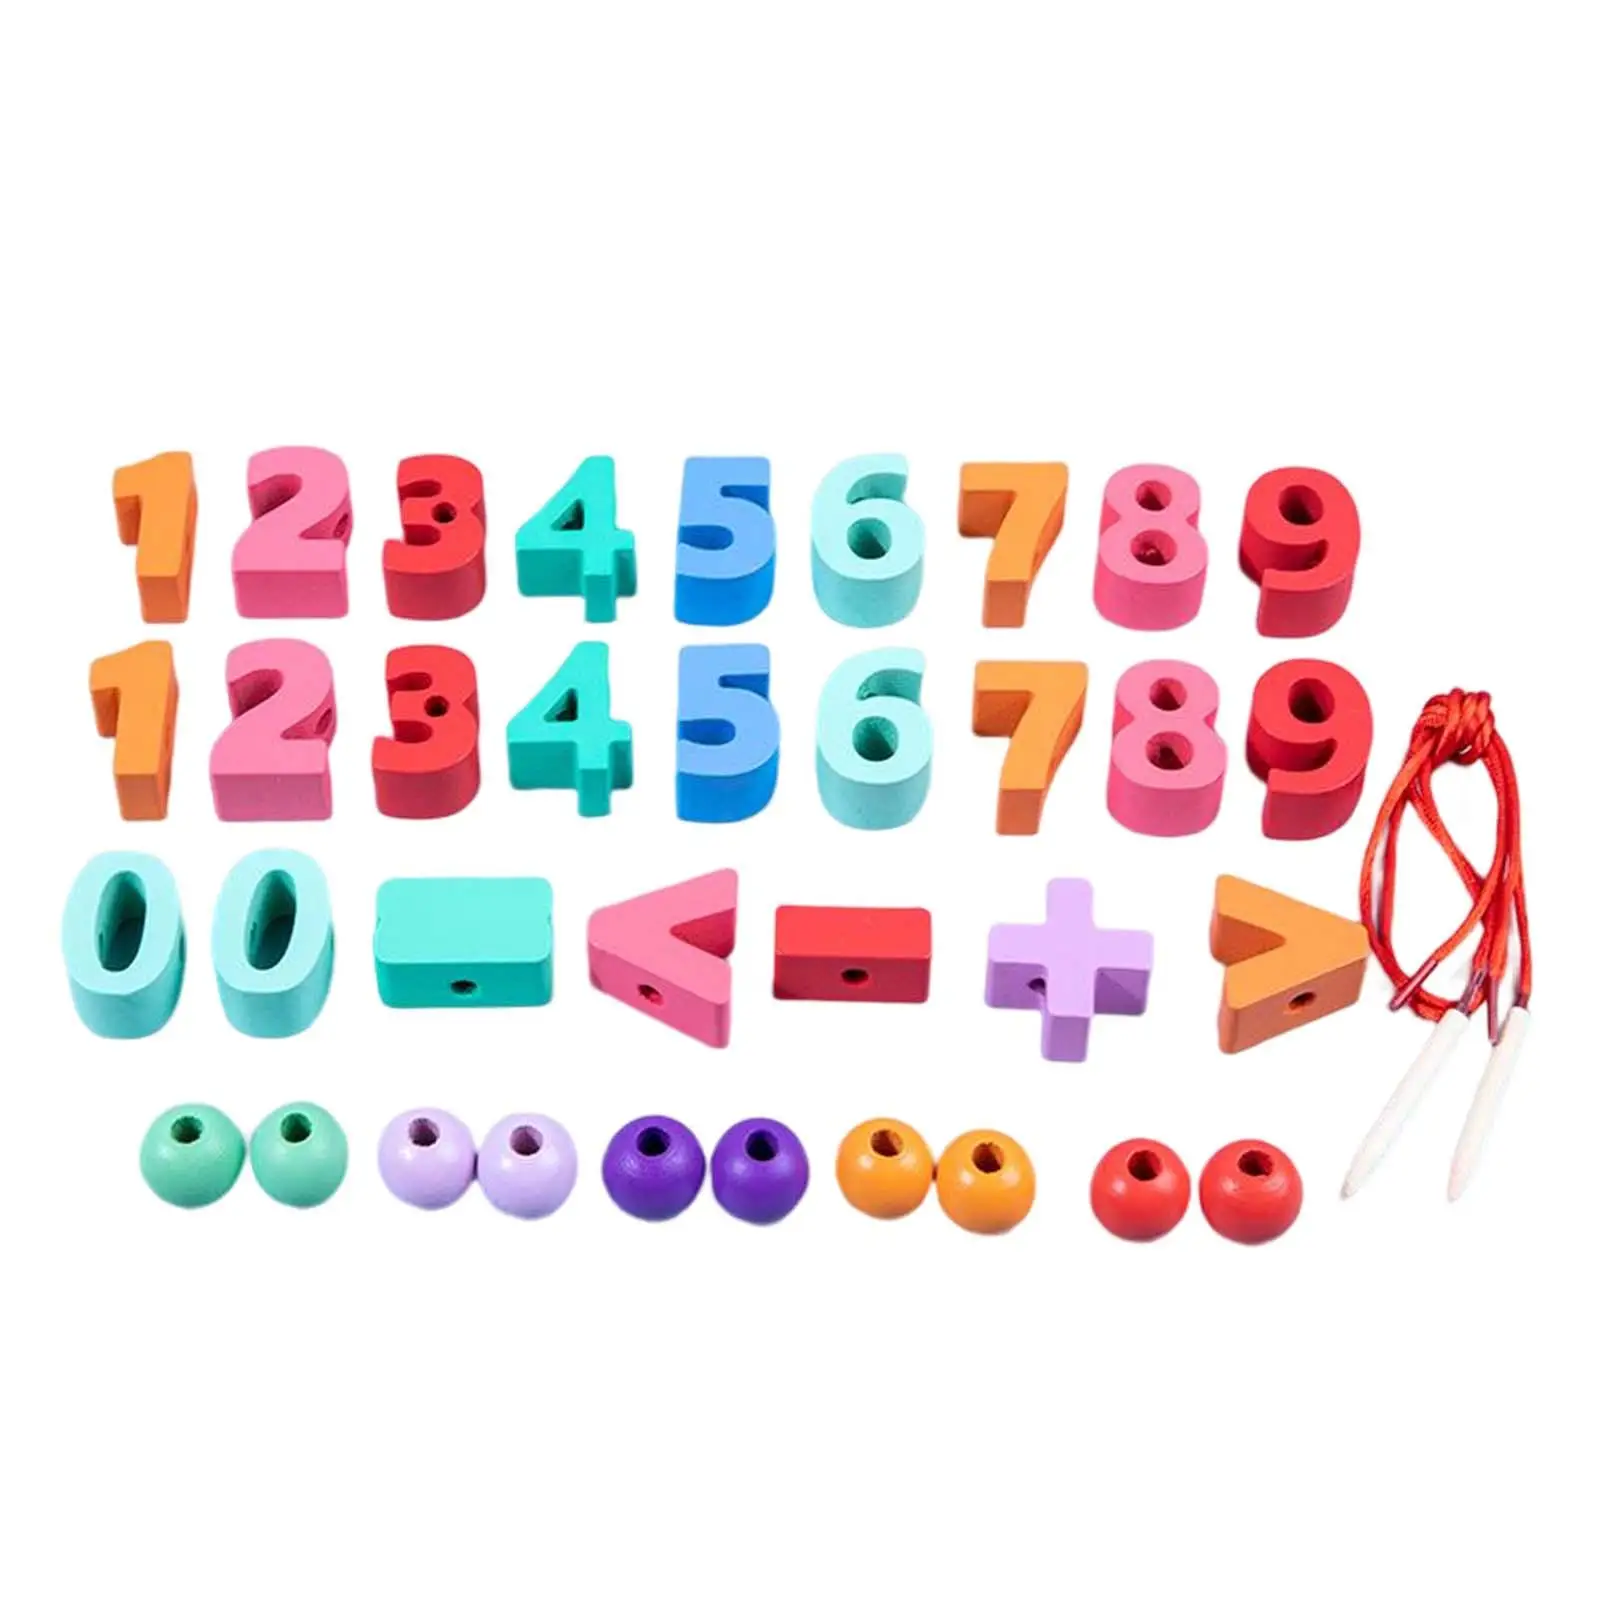 Wooden Threading Toys Early Educational Toys Wooden Crafts Preschool 3 Year Old Kids Boys Girls Lacing Beads Set for Kids Gift